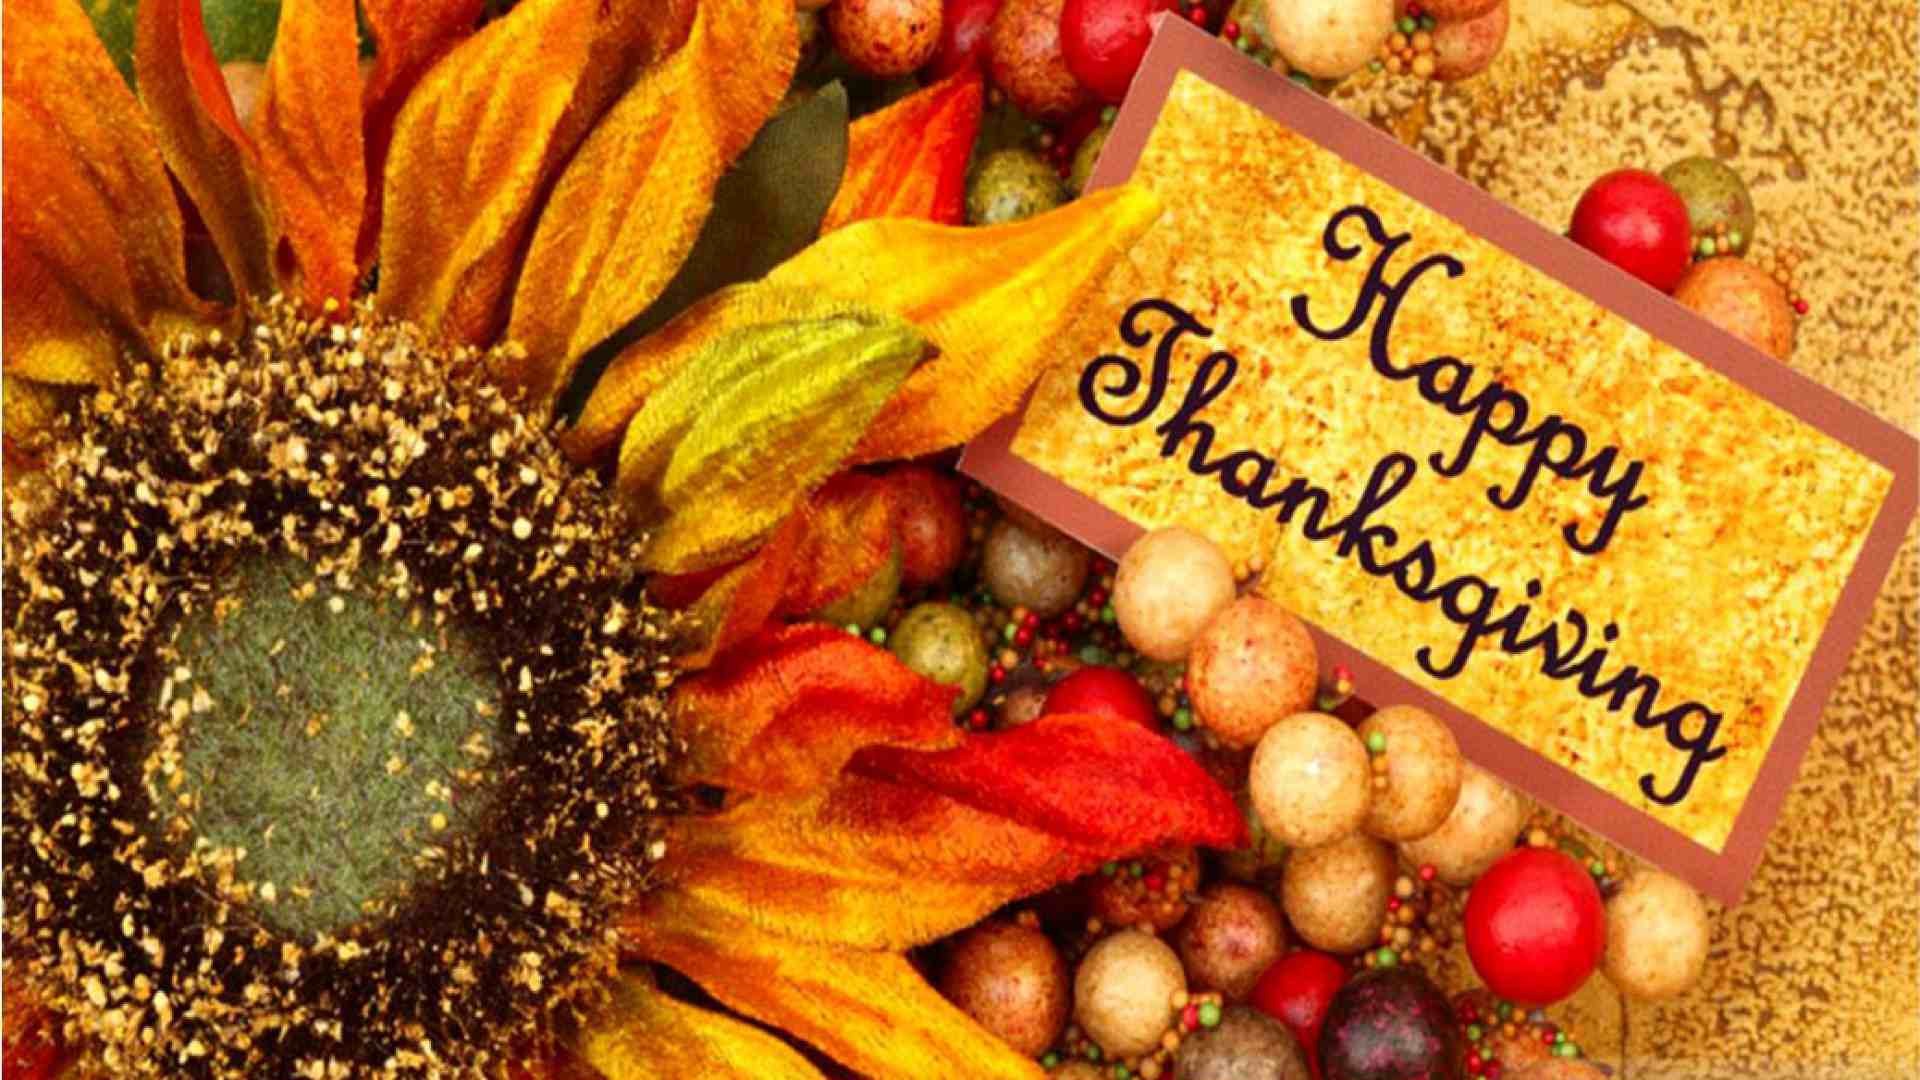 Wallpaper For Thanksgiving Image In Collection